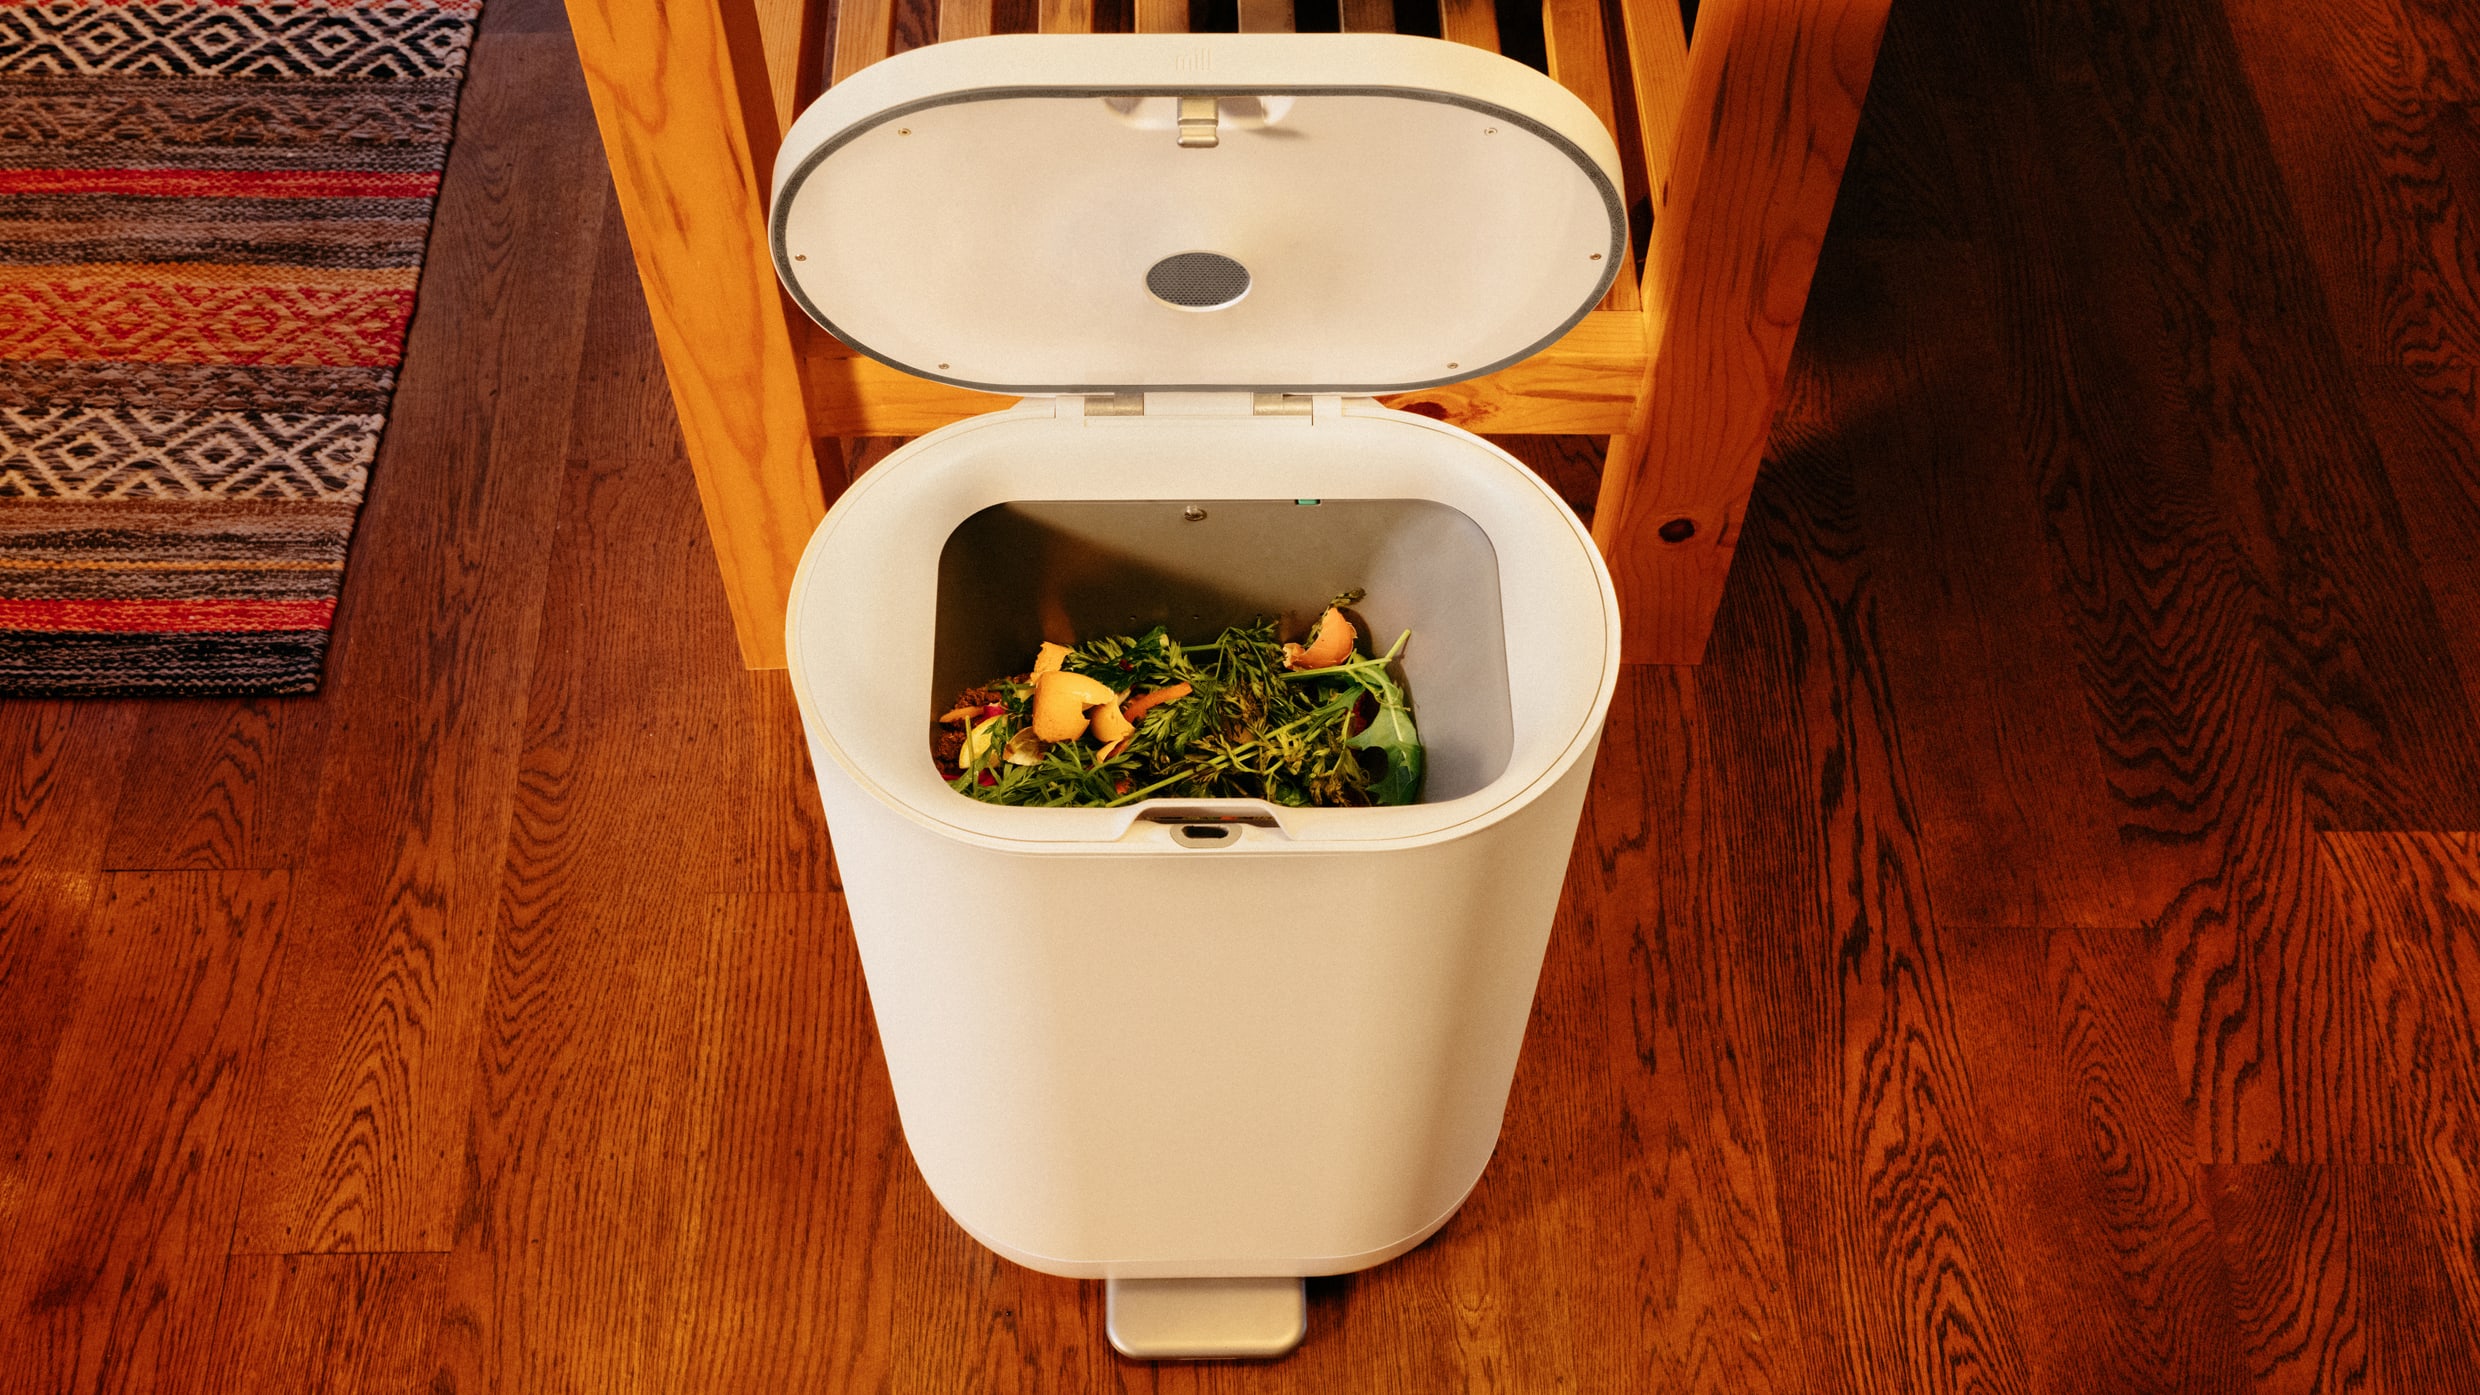 Nest's cofounder just designed the world's fanciest bin for food scraps - Fast Company